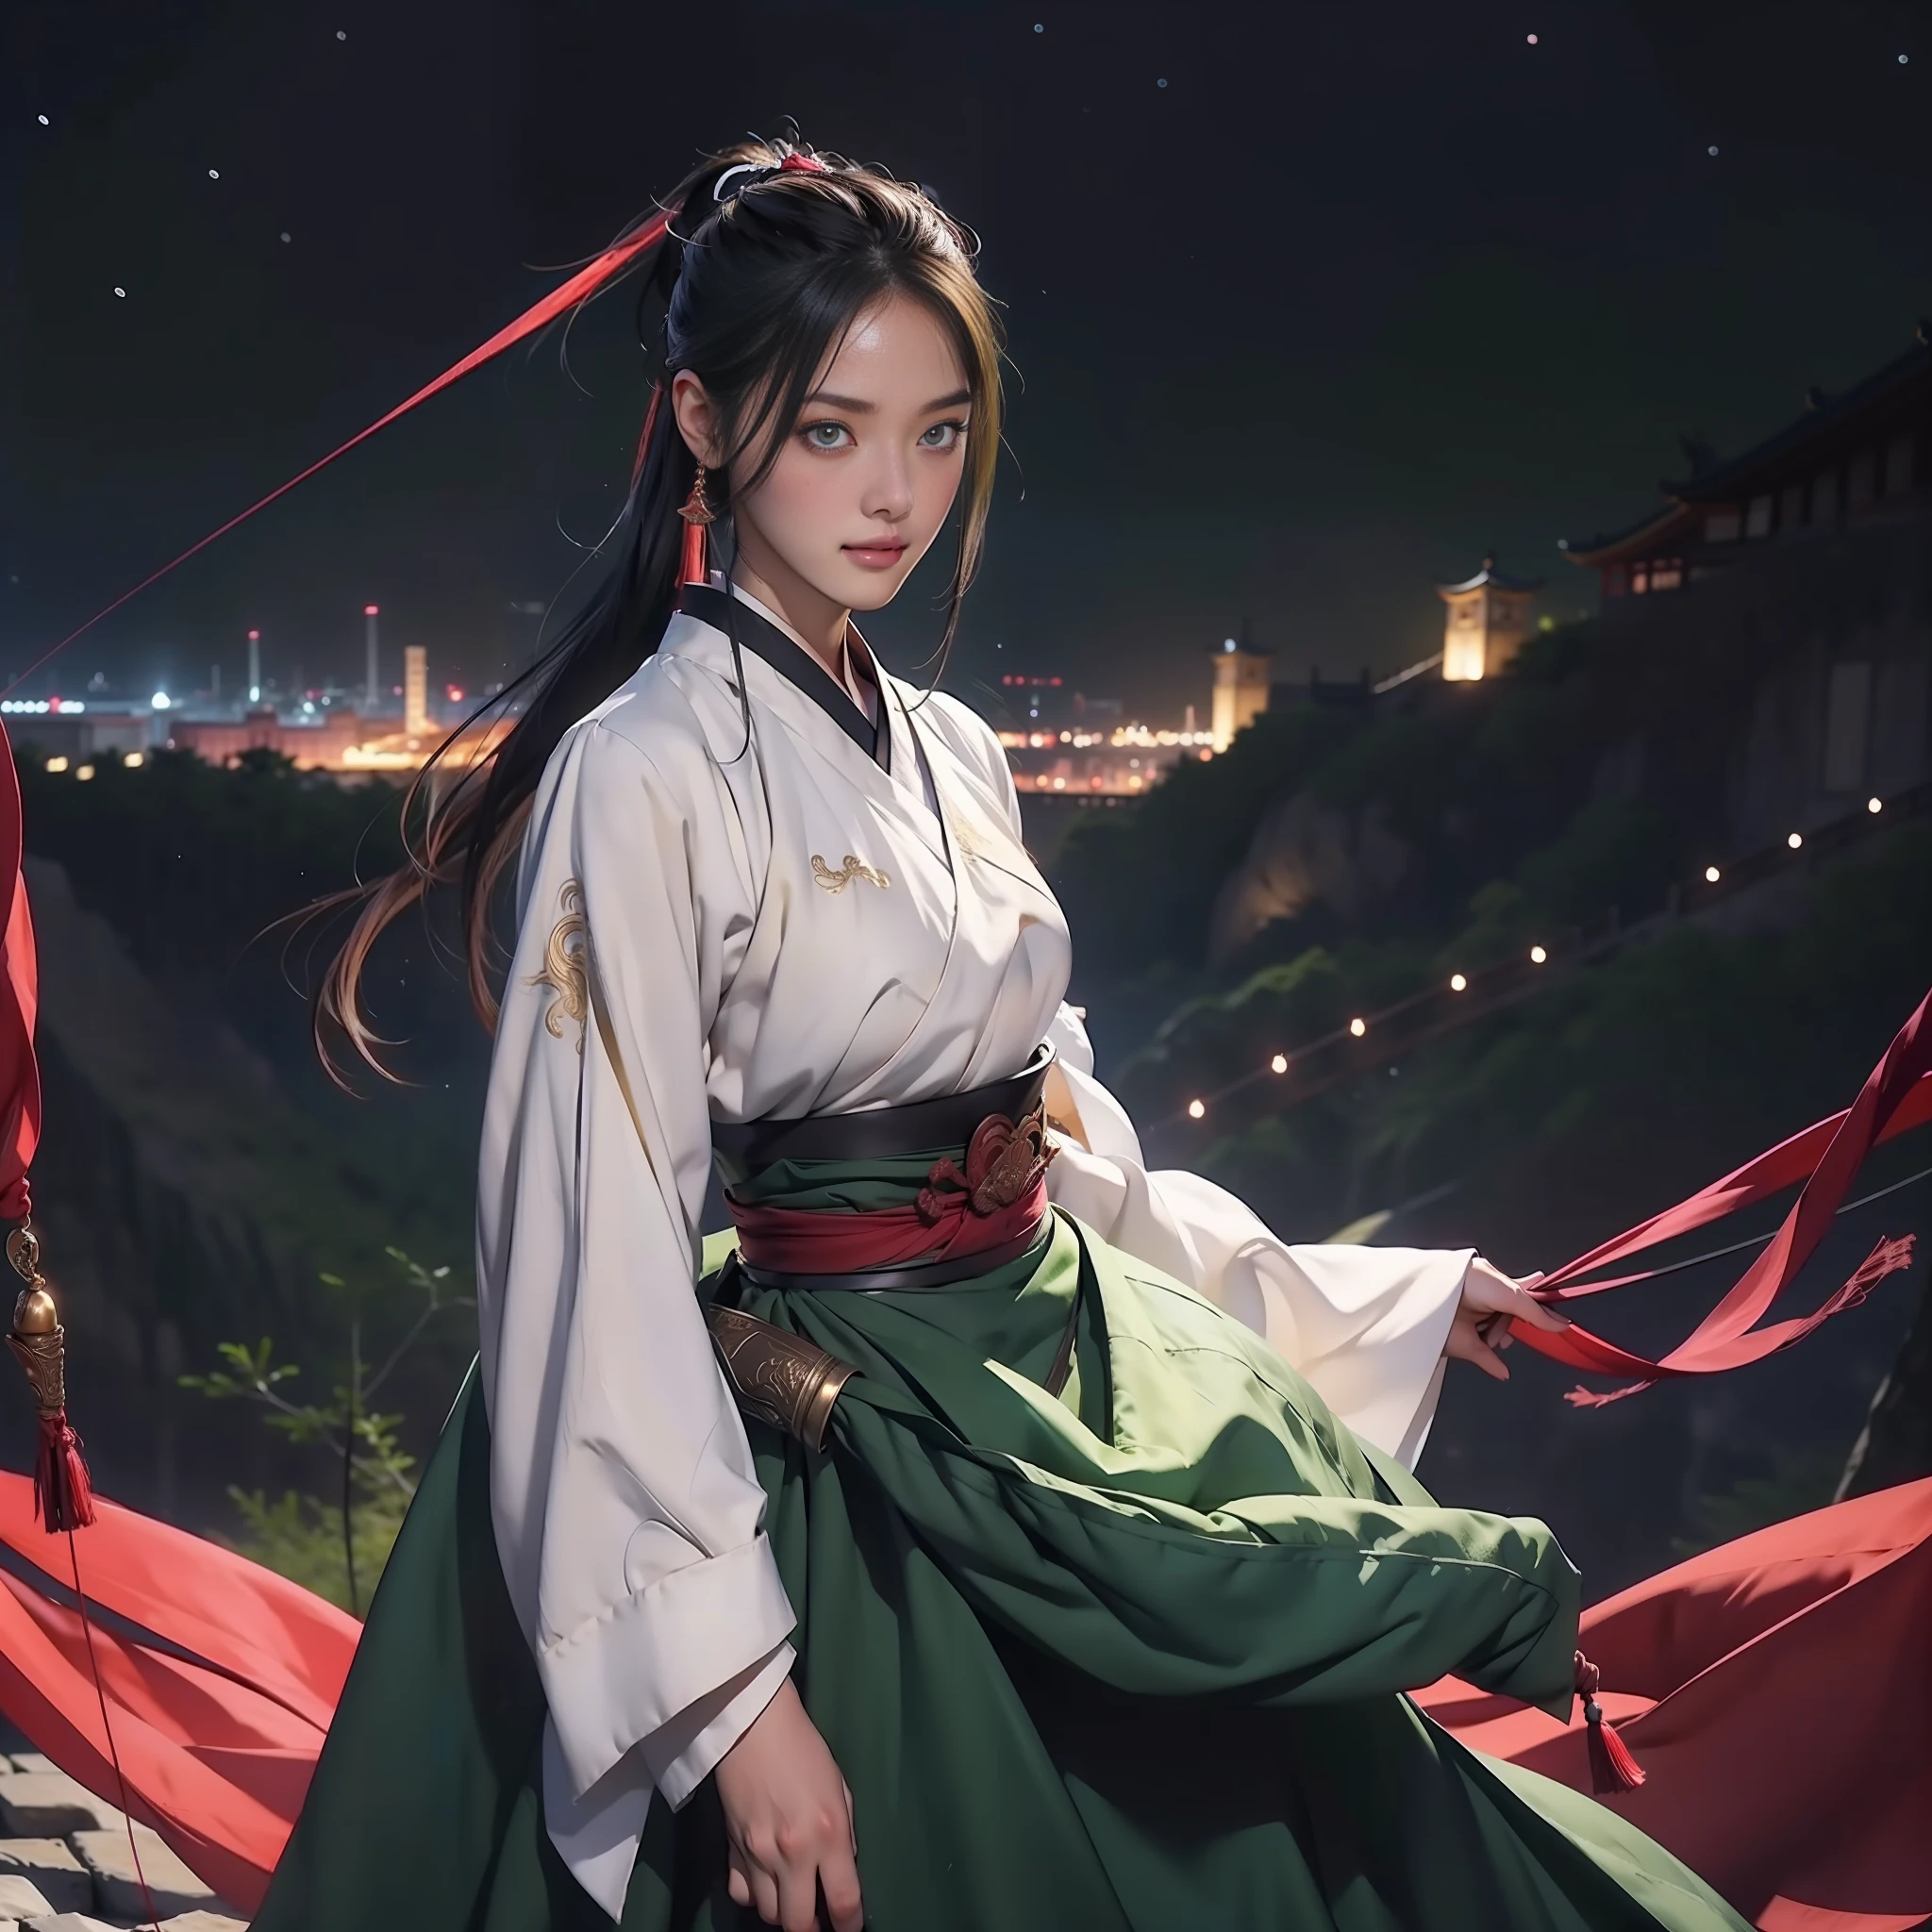 1 girl, (girl), anime girl, hanfu girl, chinese girl, anime role play, realistic role play, slightly fat, willow eyebrows, beautiful appearance, handsome, yellow eyes, smile, brunette hair, yellow eyes, raised eyebrows, (short ponytail), cotton skirt, (dark green skirt: 1.8), belt, shoulder armor, standing, translucent skirt, long skirt, long skirt, black hair, long eyelashes, solid round eyes, red ears, fragrant, starry sky background, standing on city wall, chinese city wall, mountain range, epic, surrealism, falling shadow, Super Detail, Accurate, Stereogram, Atmospheric Perspective, 8K, Best Quality